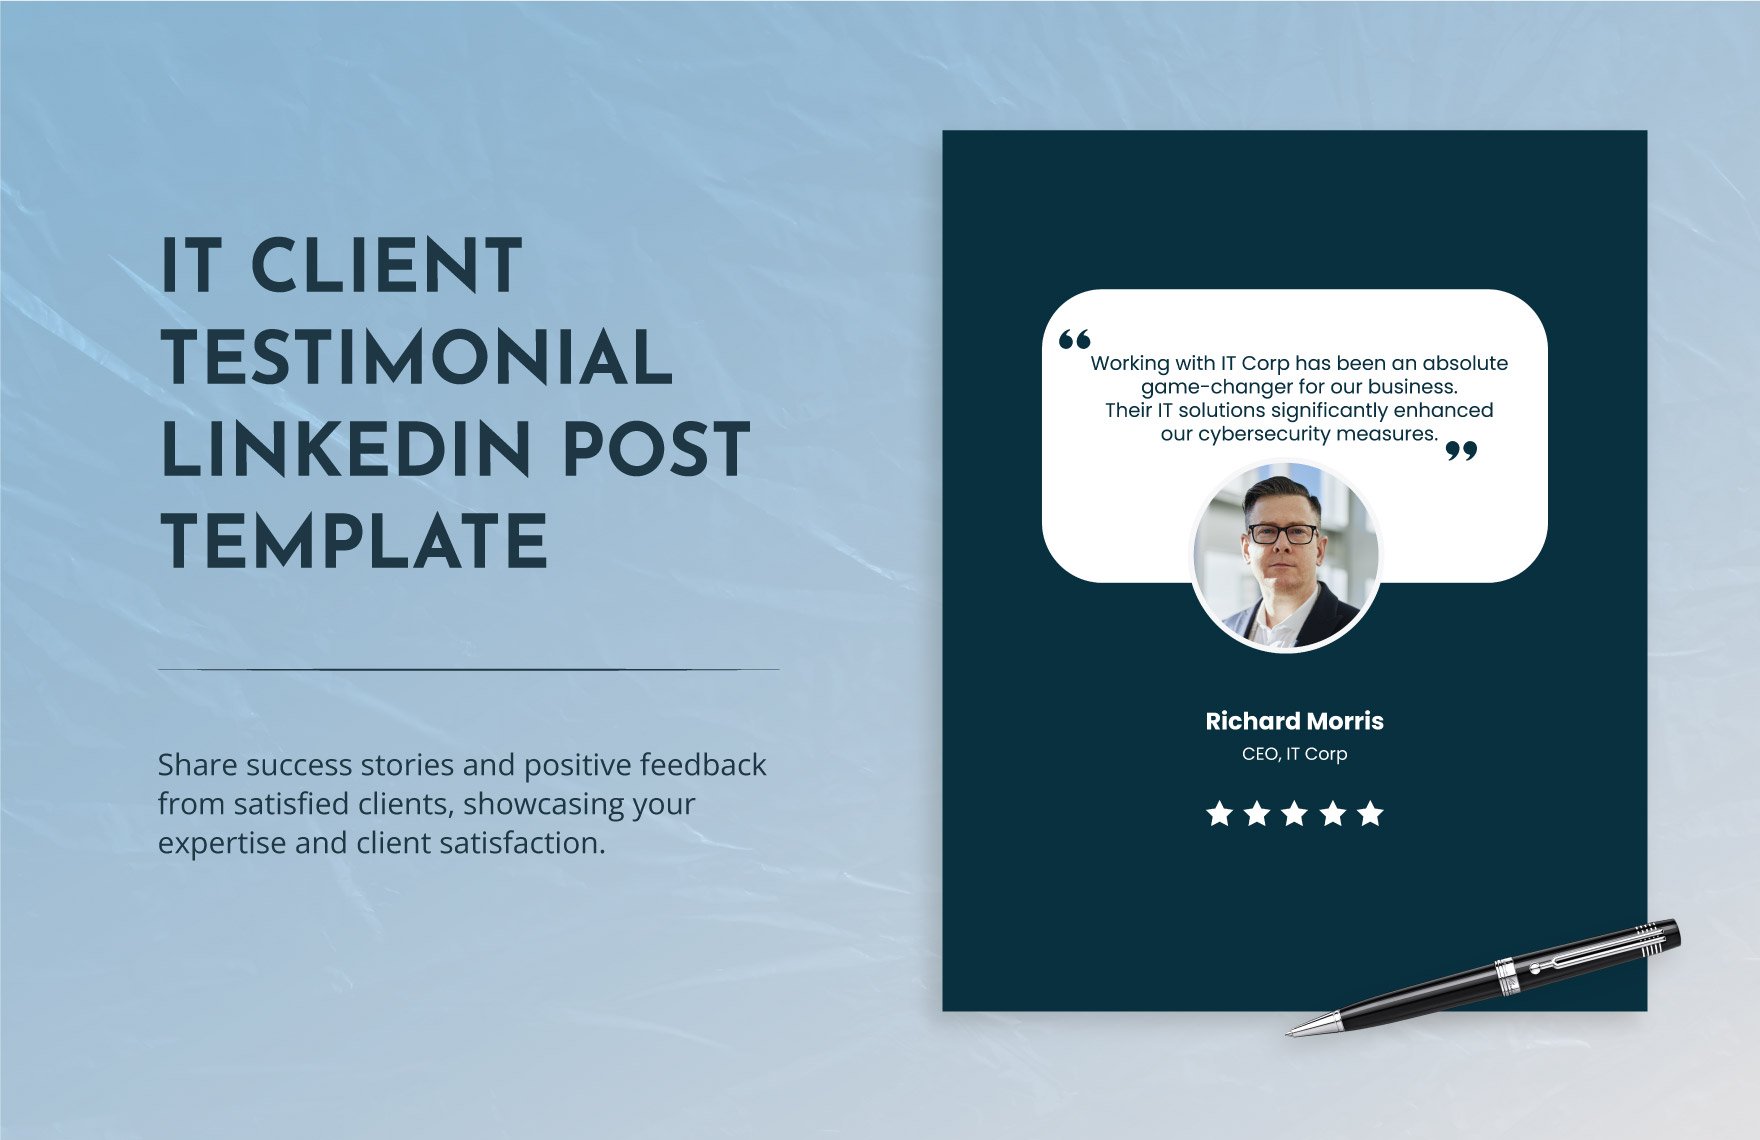 IT Client Testimonial LinkedIn Post Template in PNG